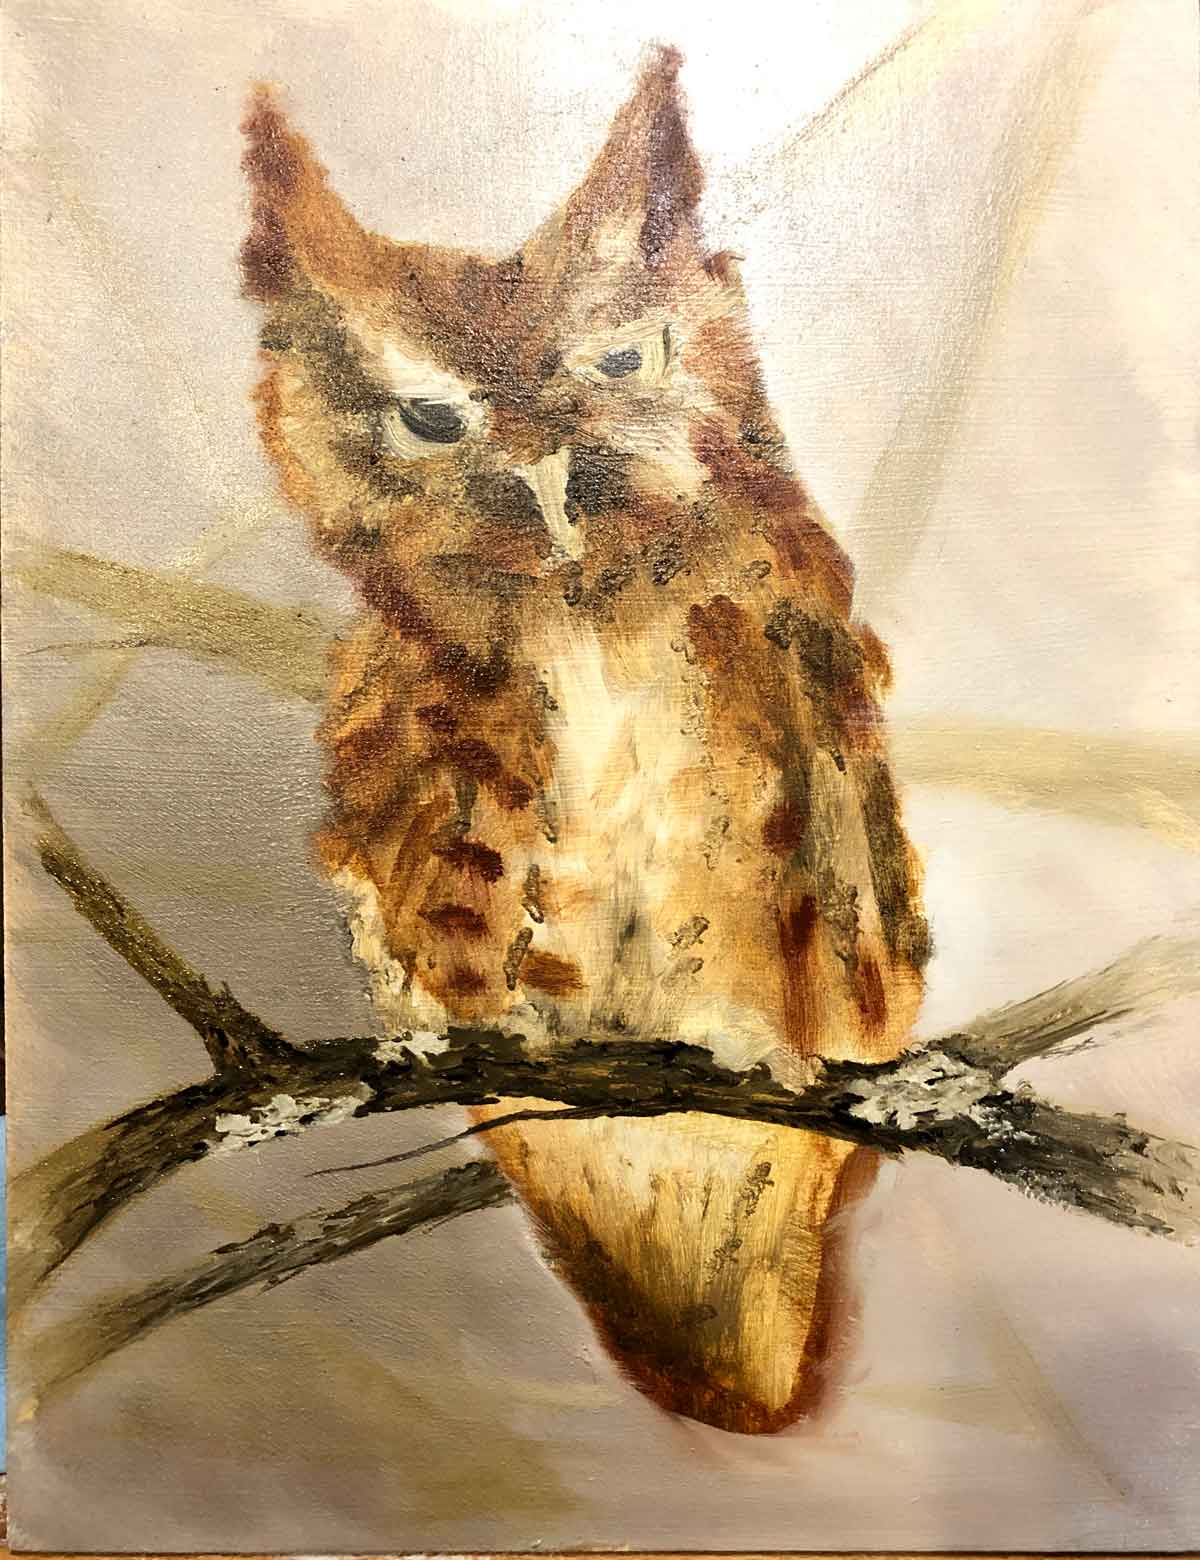 The progress pic of my painting of a screech owl.